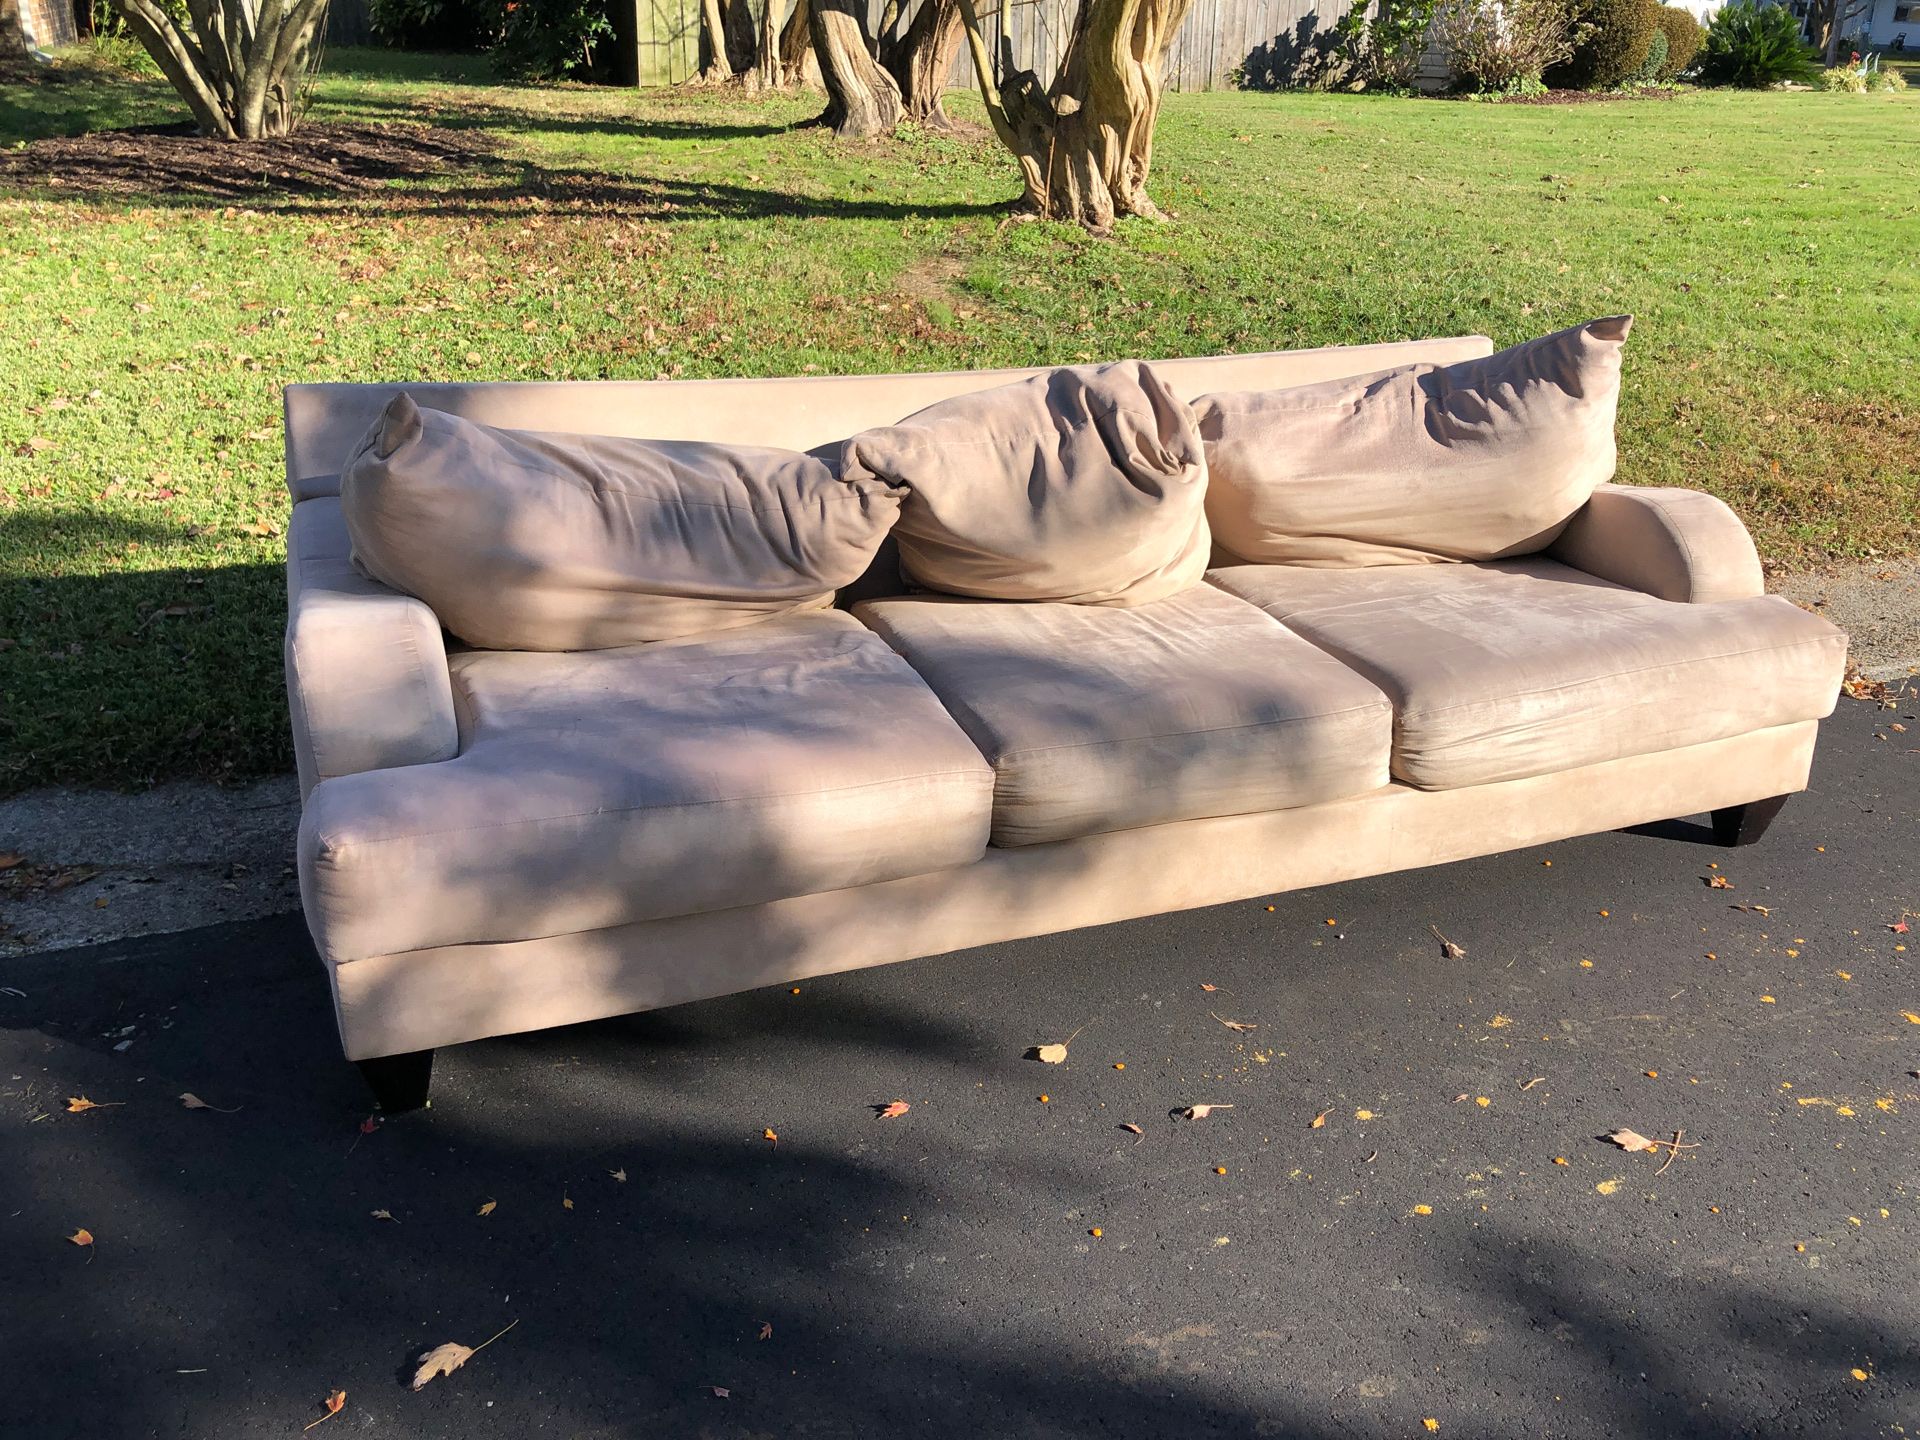 FREE sofa - pick up today